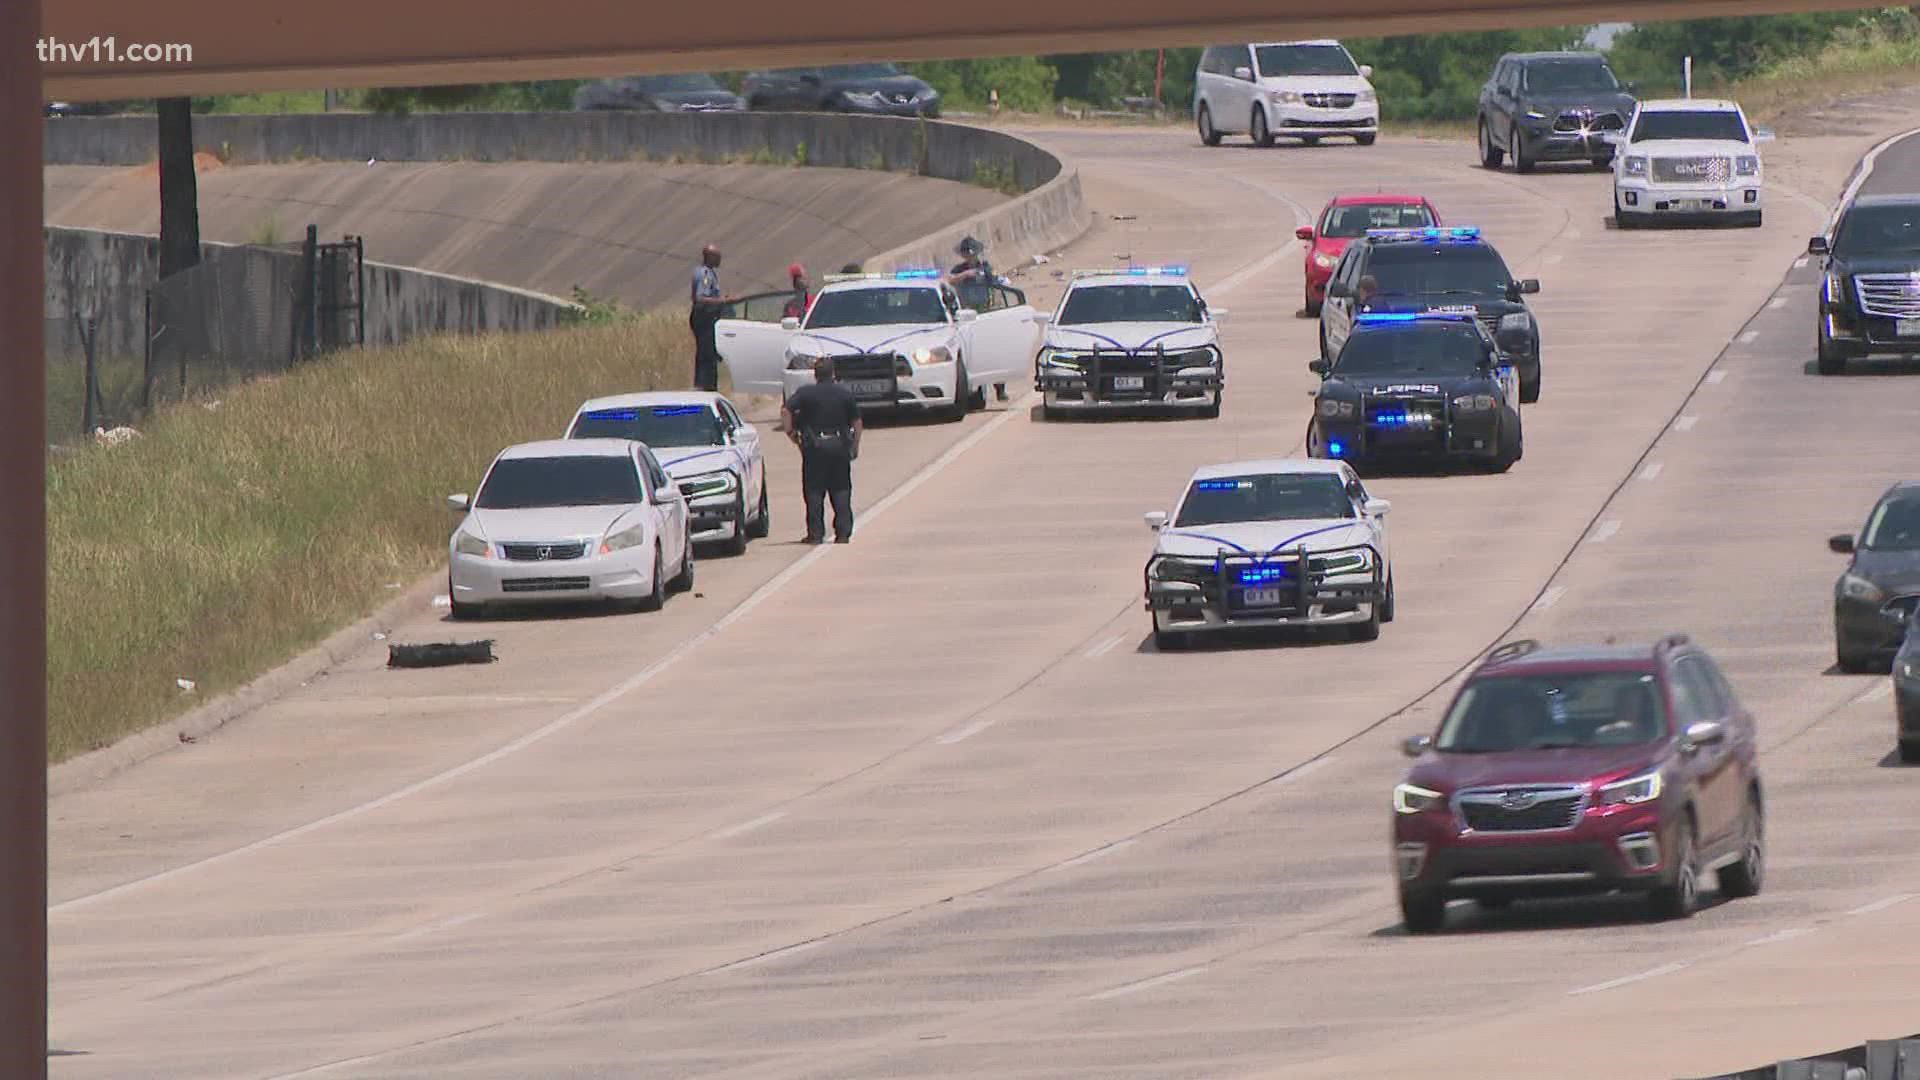 A shooting between two cars on I-30 in North Little Rock sent one man to a hospital and prompted police to alert drivers on I-630.